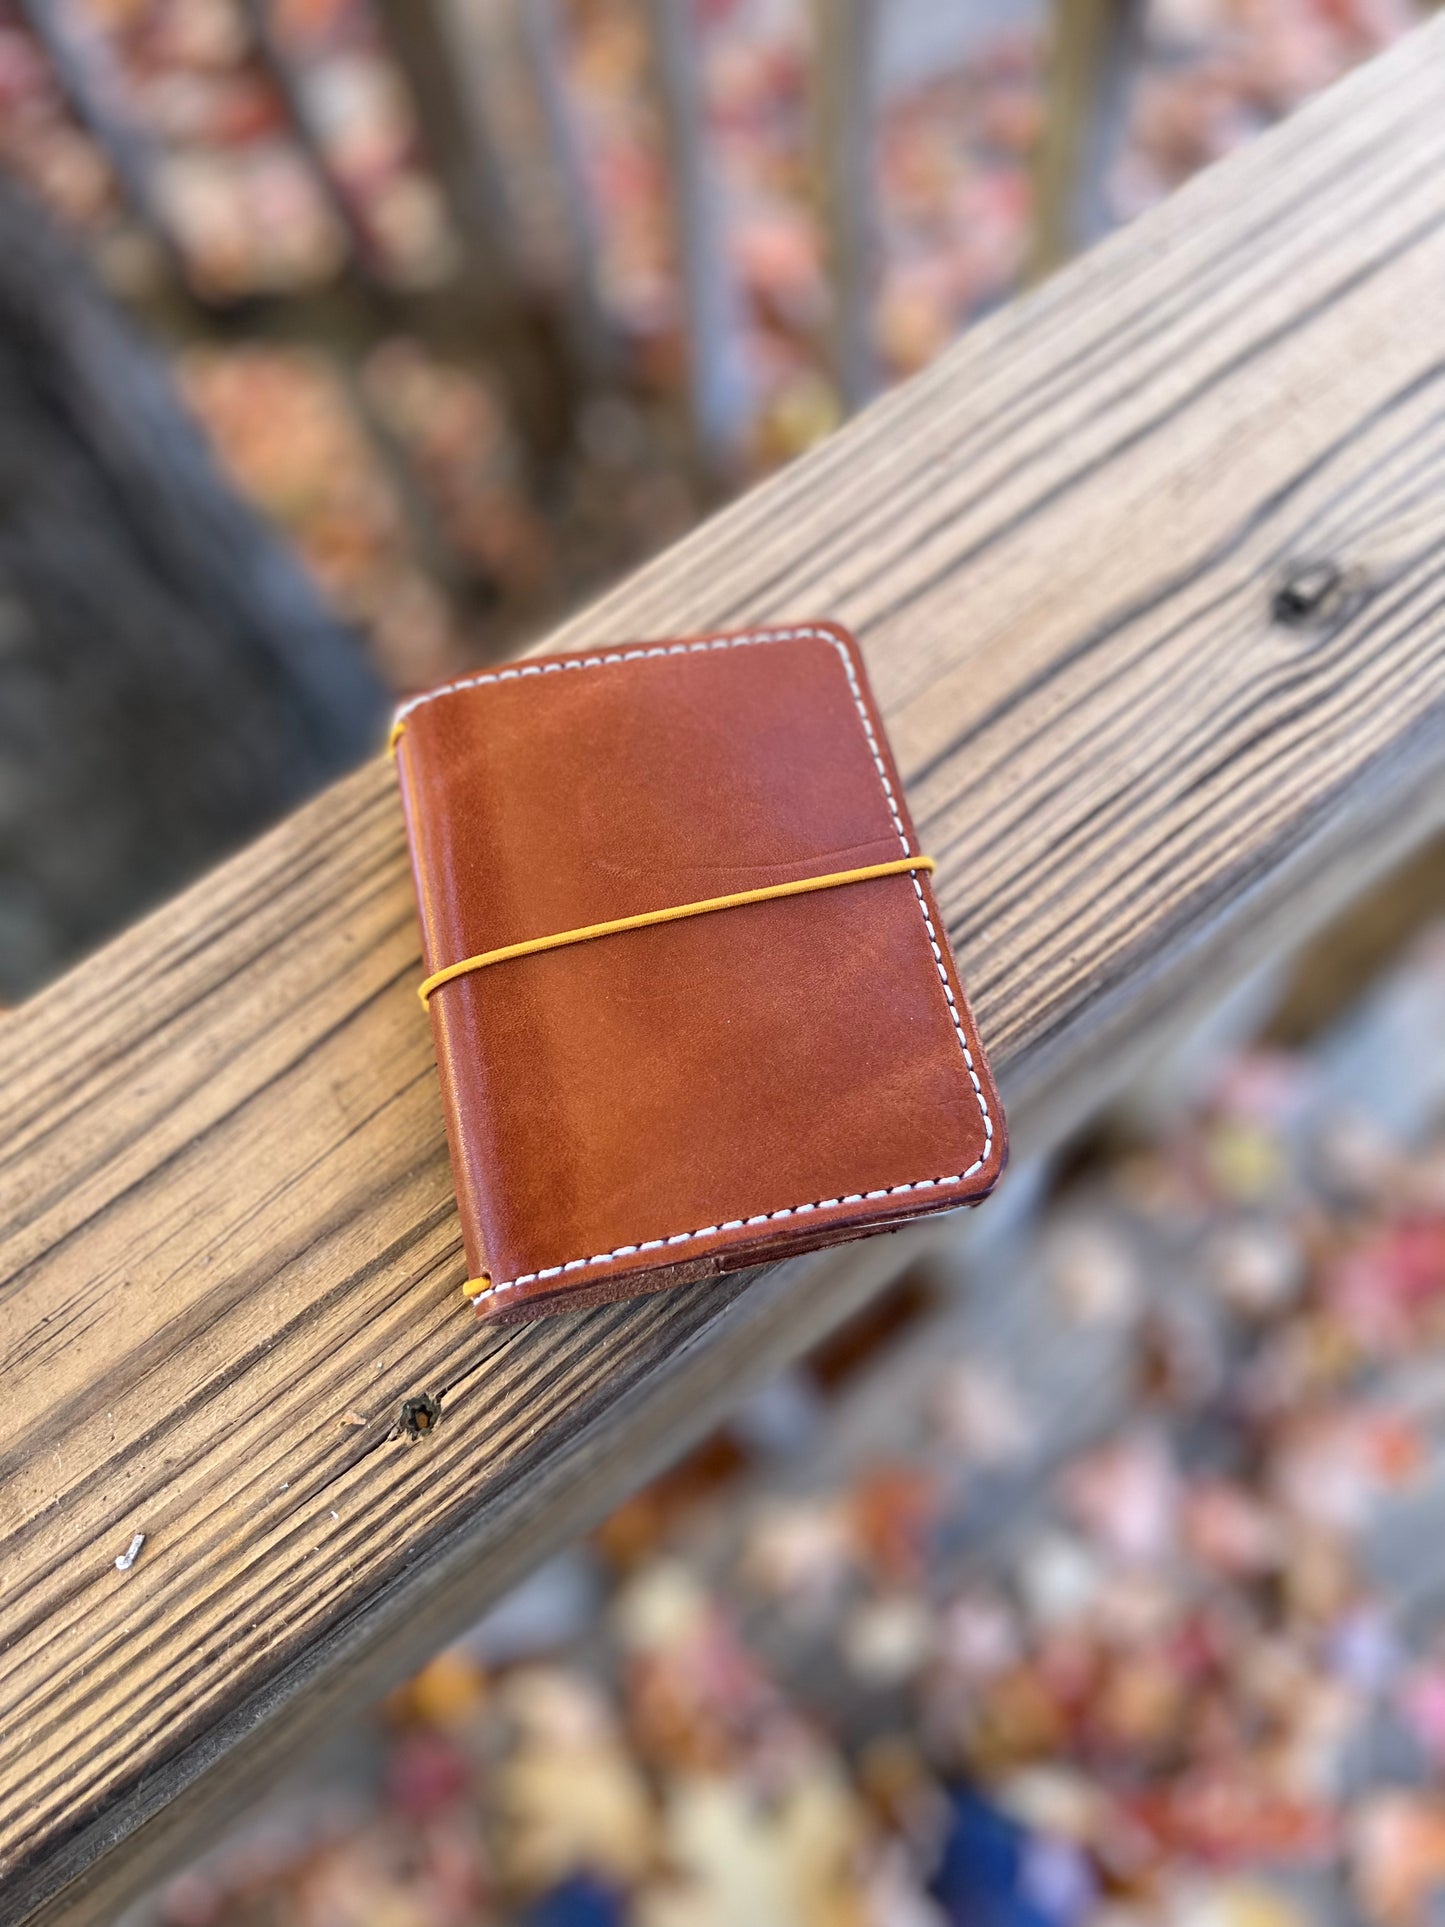 The mini Composition Wallist: Leather Card Wallet and notebooks, 2 Mini Composition books included